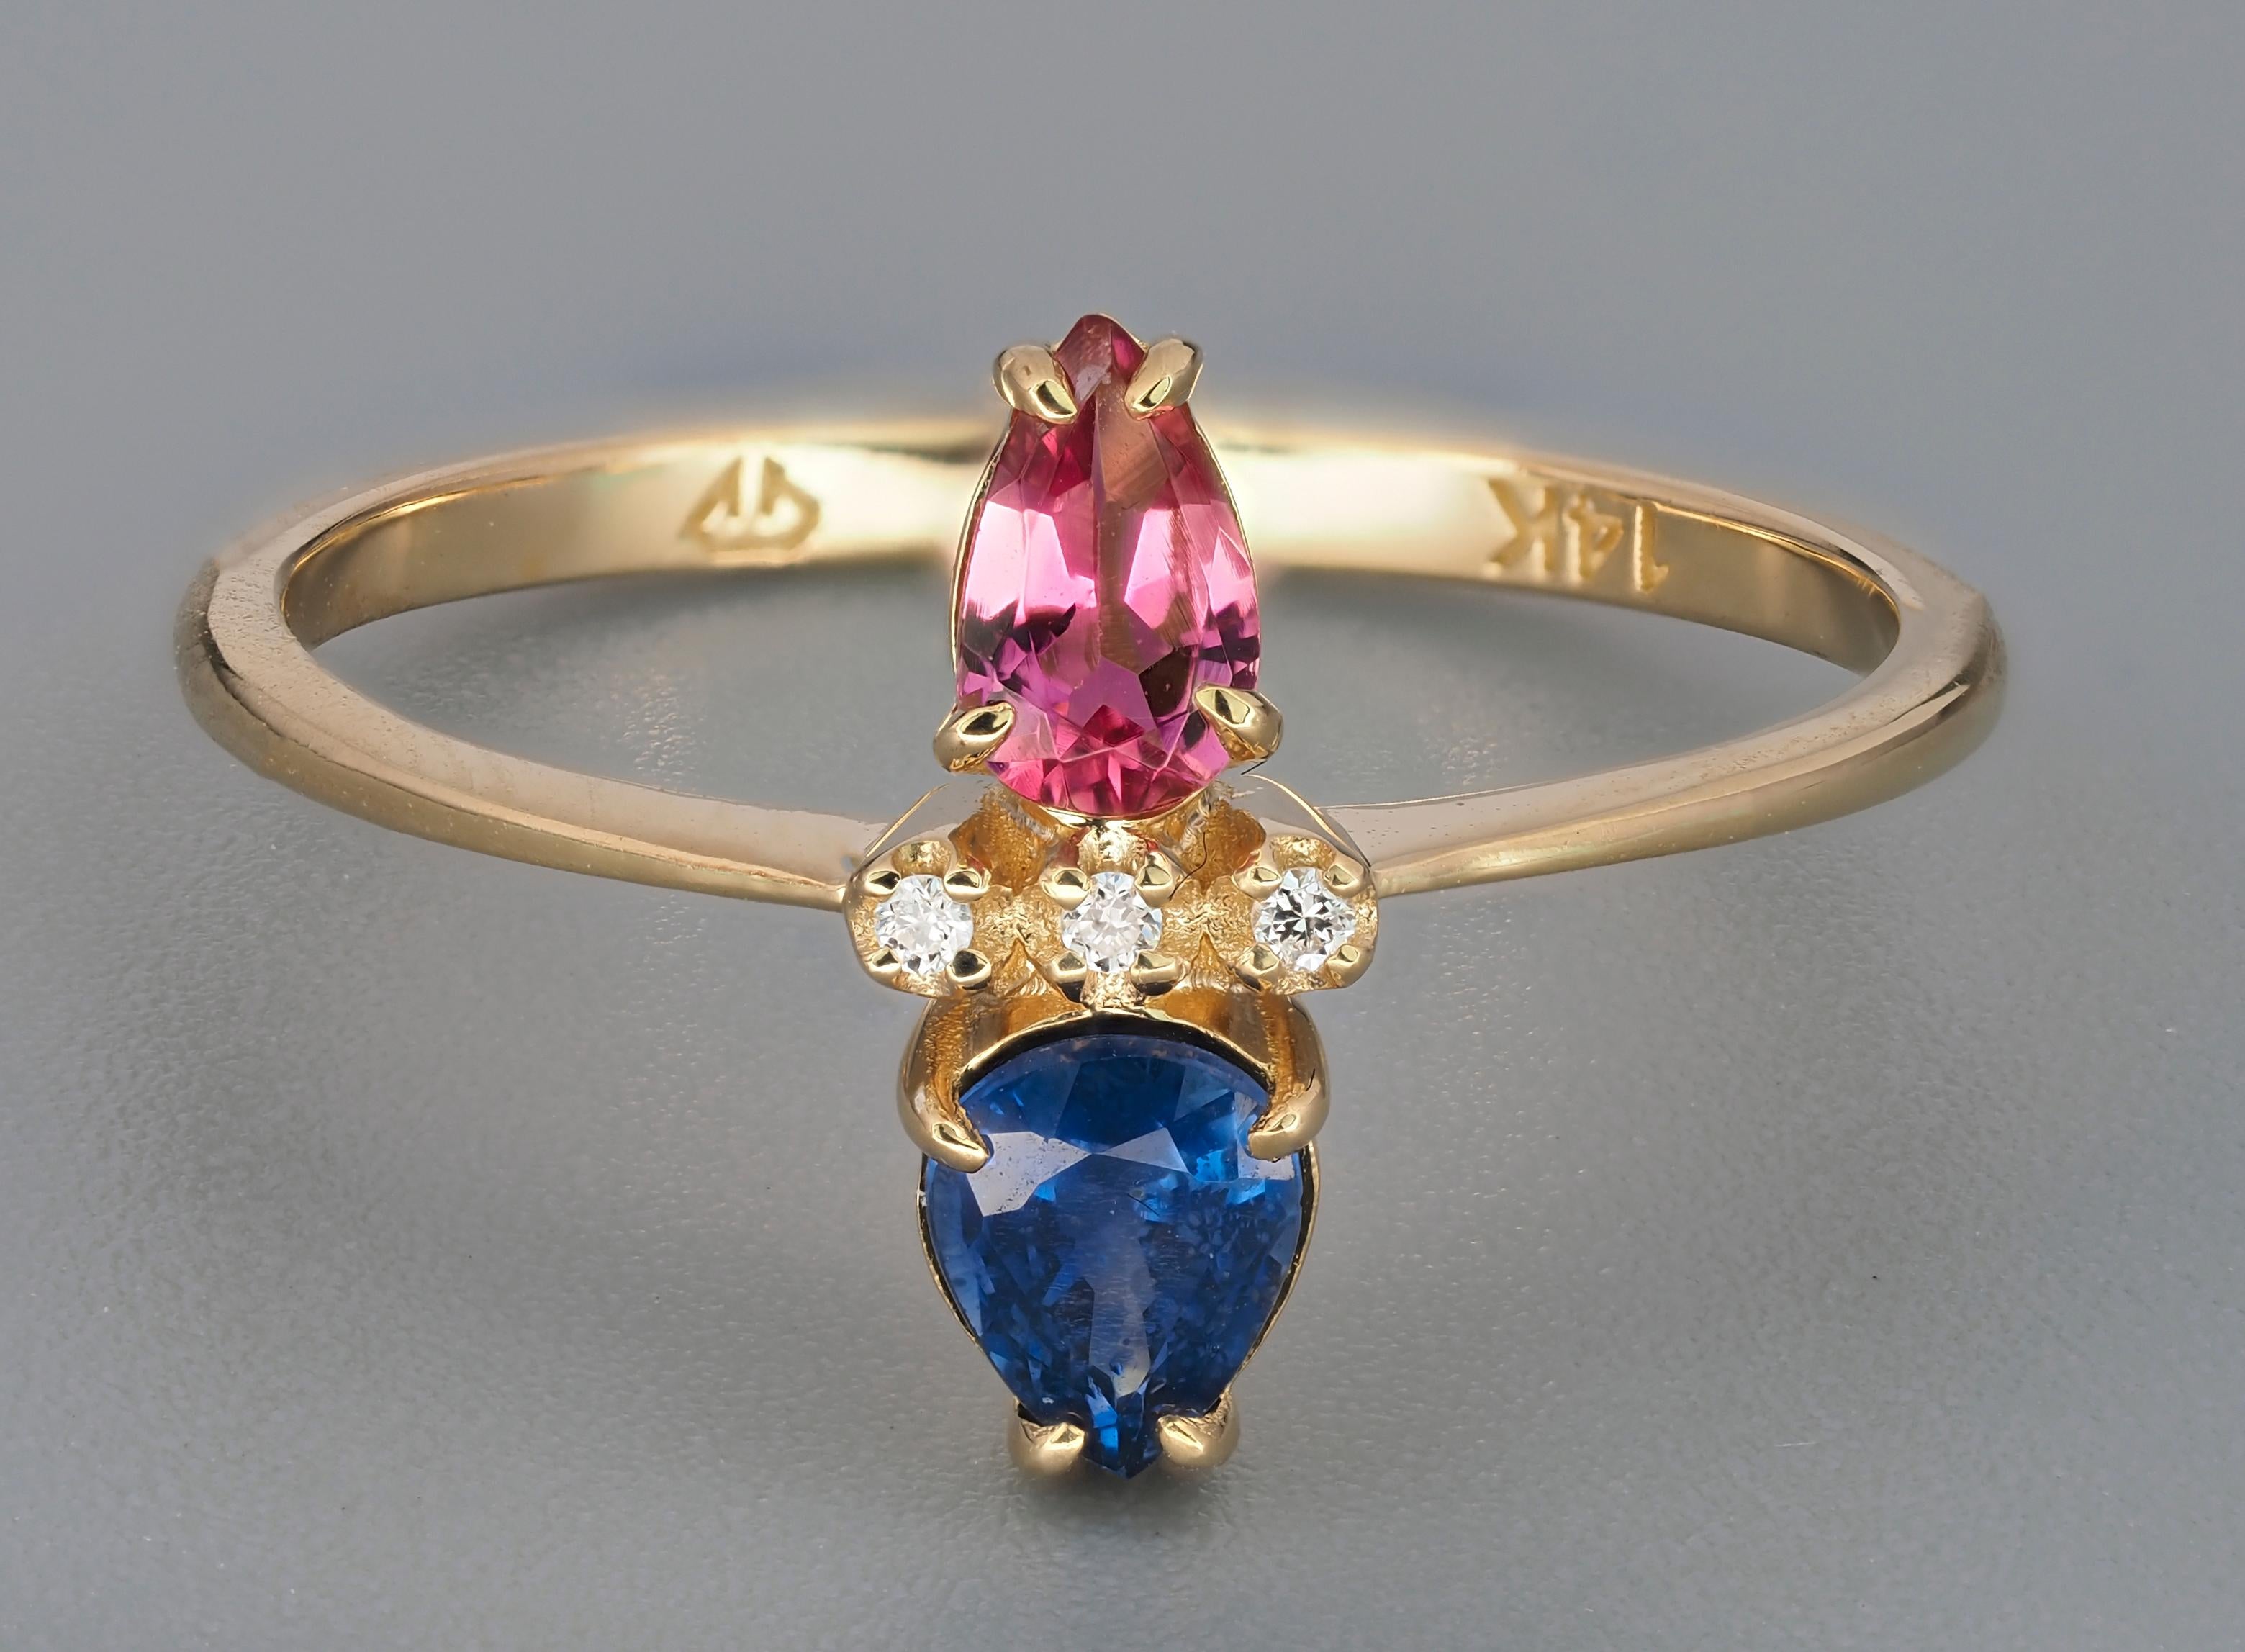 For Sale:  14k Gold Ring in Art Deco Style with Central Sapphire, Tourmaline and Diamonds 3